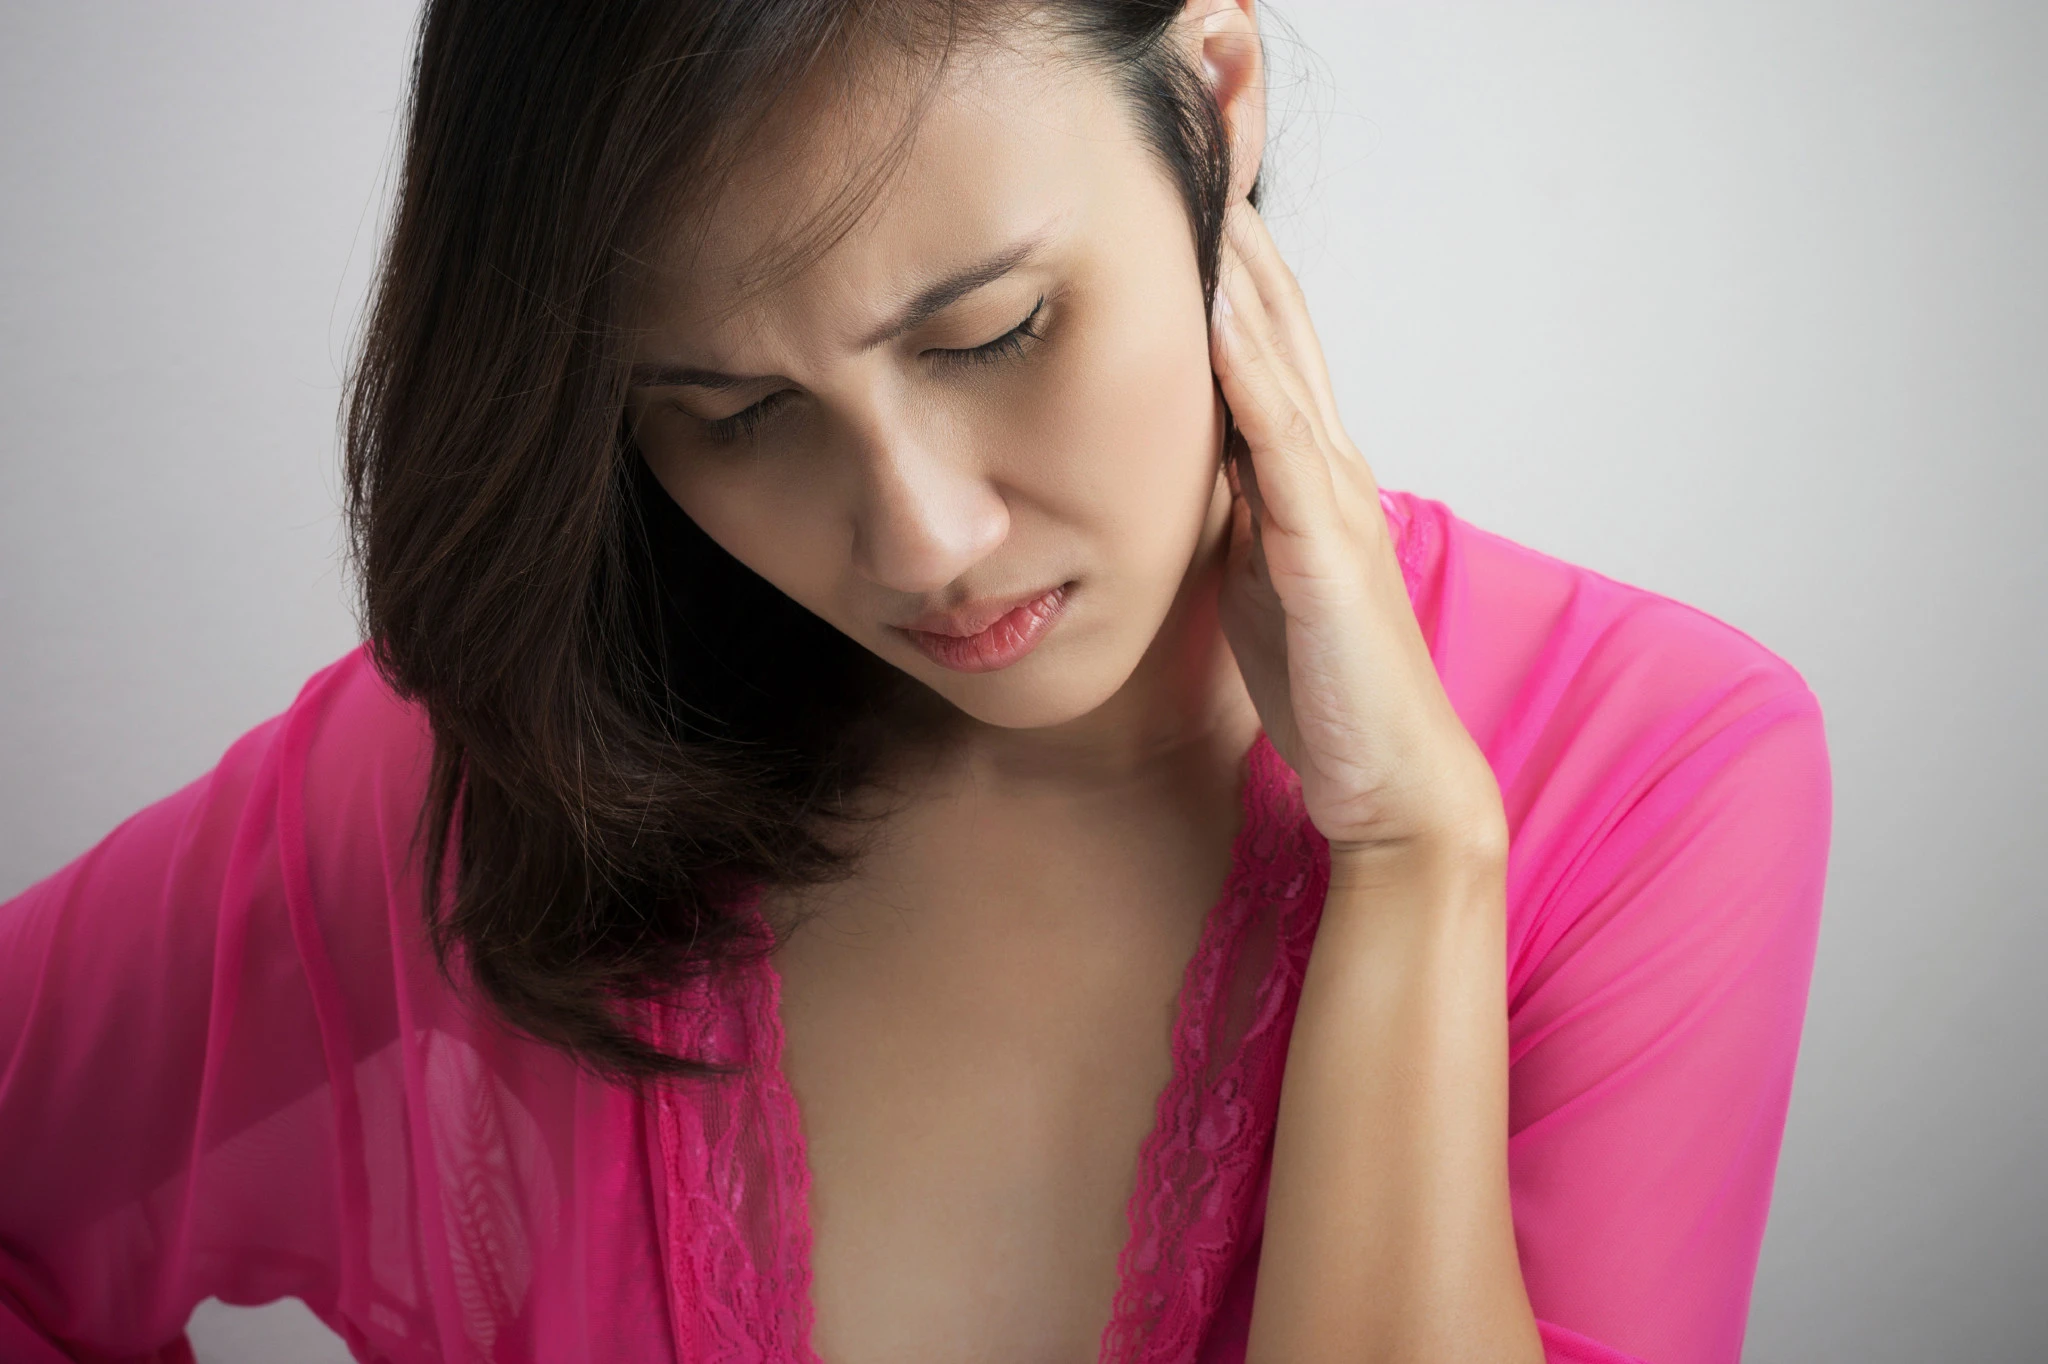 What Is Causing My Neck Pain and Headache? | Spine-health